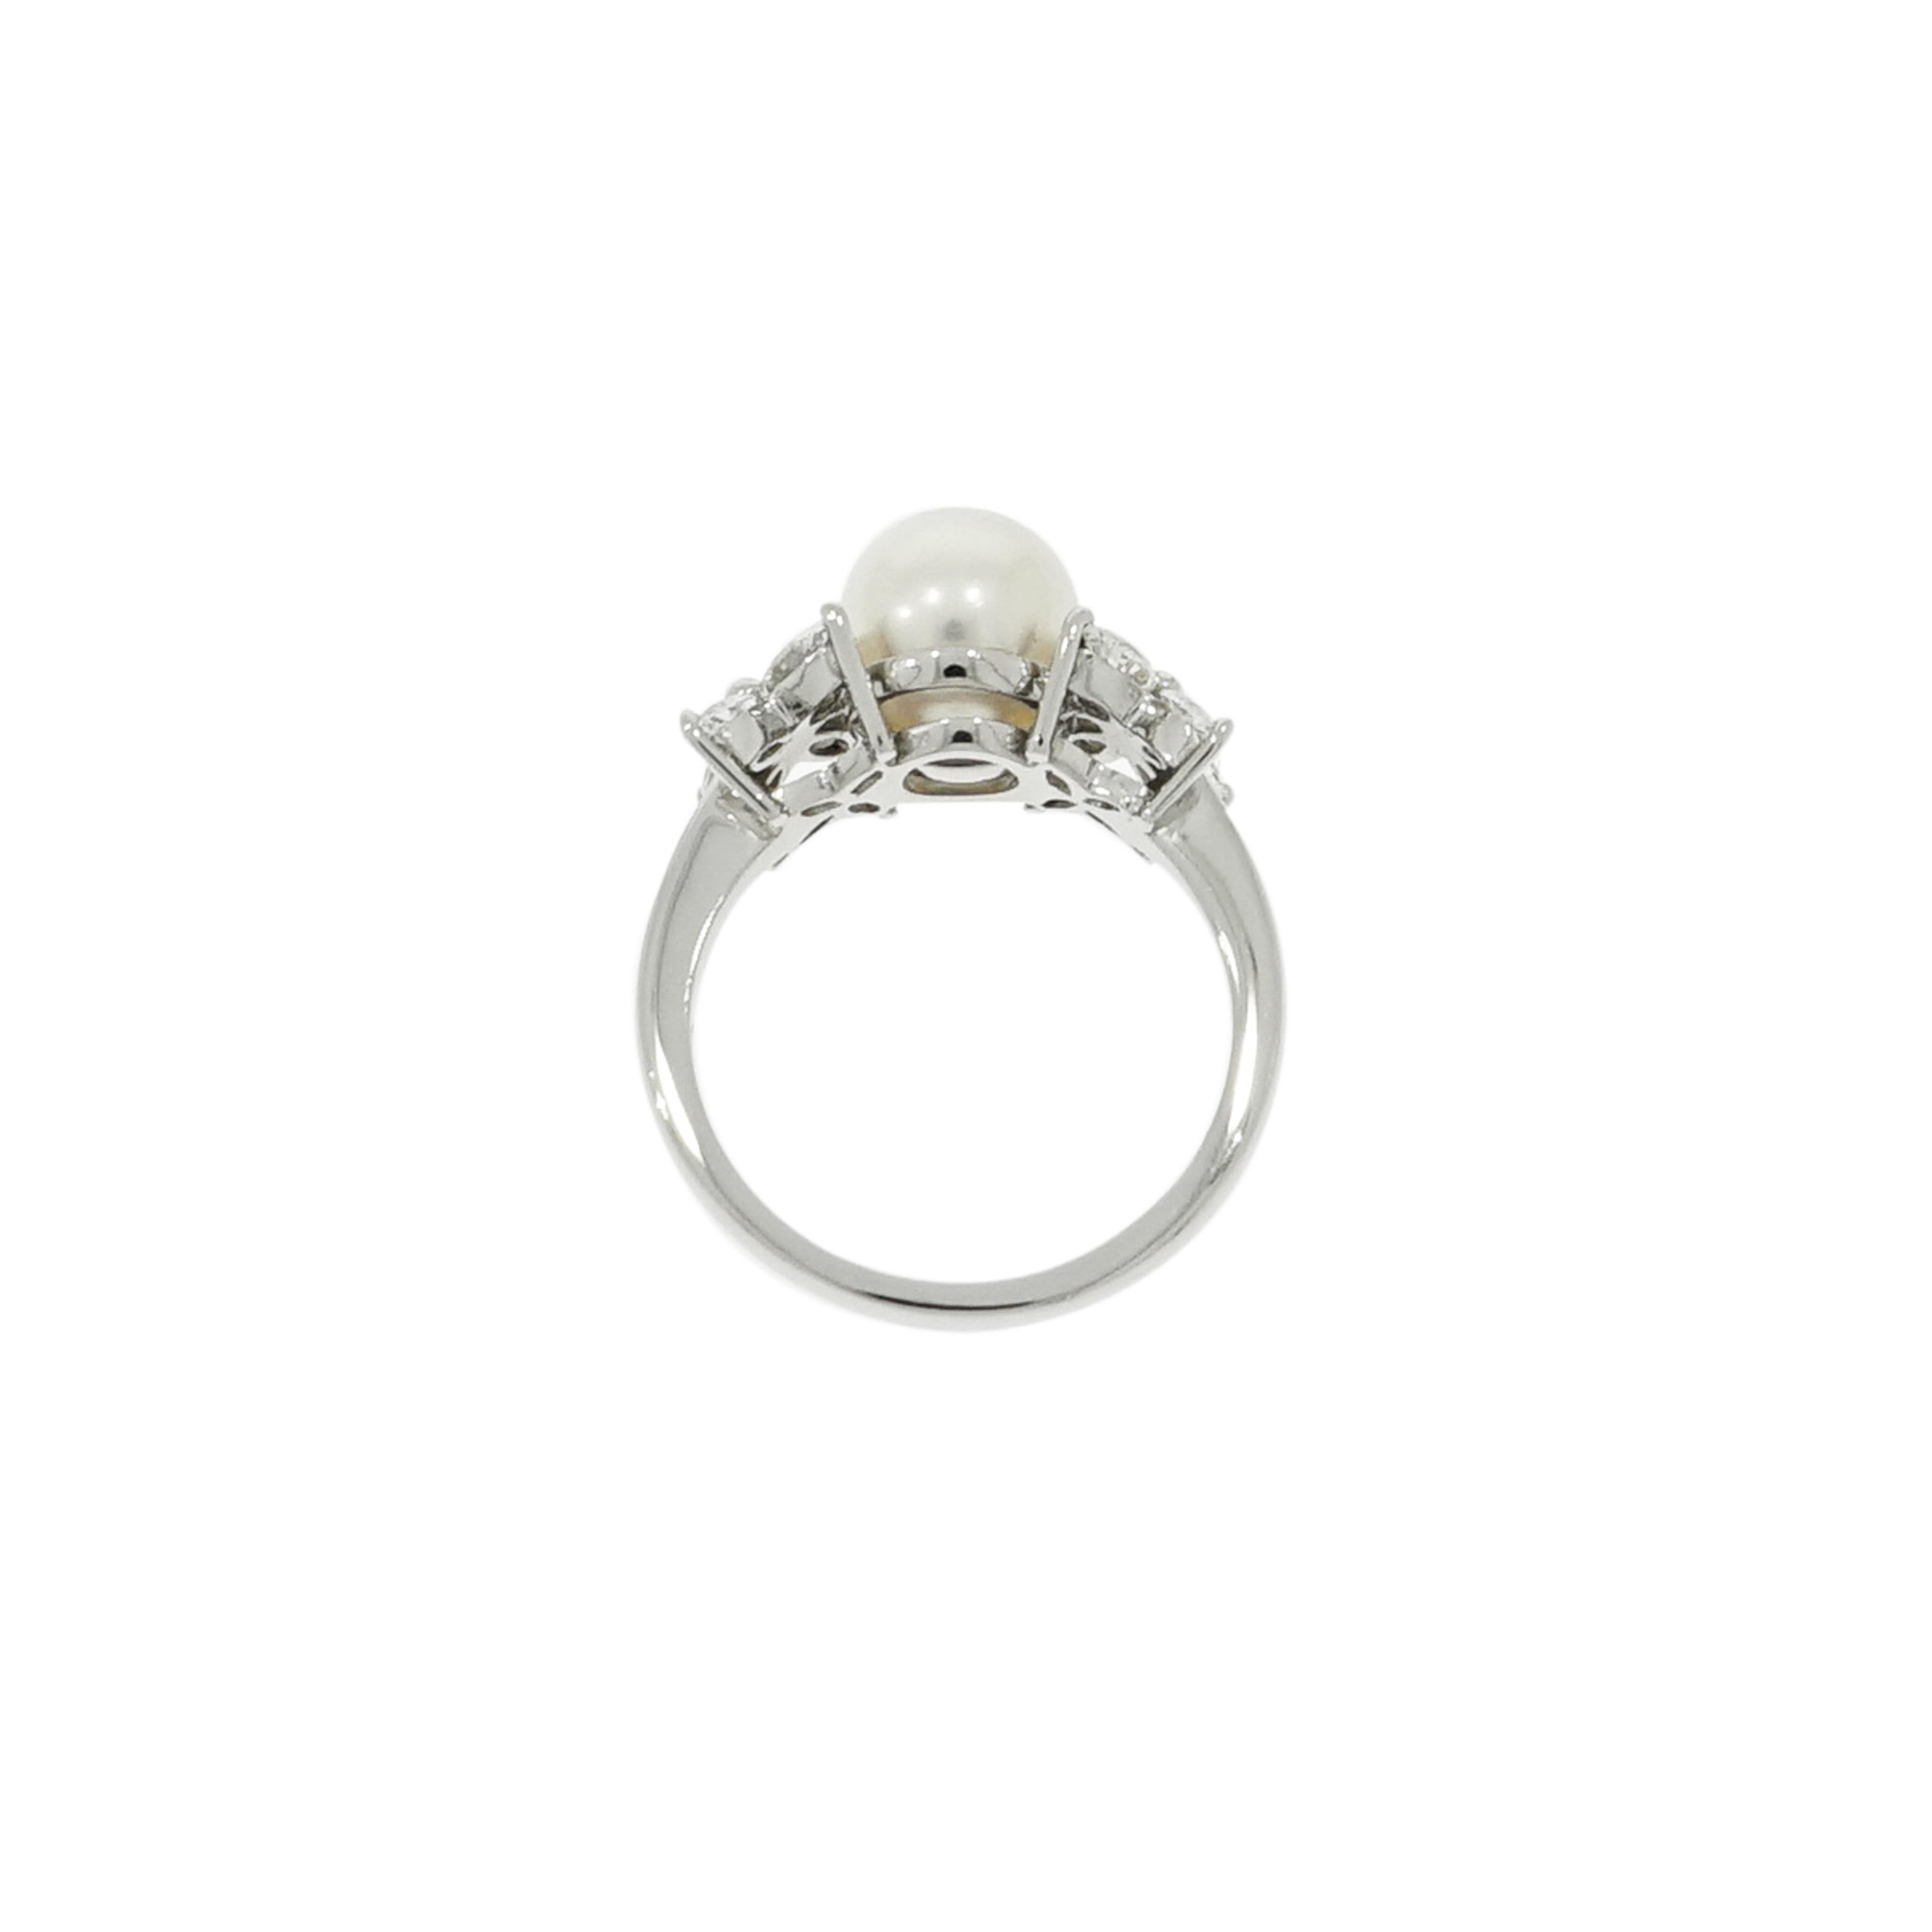 Tiffany Victoria celebrates the blazing brilliance of Tiffany diamonds, paired with a timeless 7.5-8 mm white pearl center. Crafted in Platinum, this classic ring is set to fit a finger size 6. The total weight of diamonds is approximately 0.36